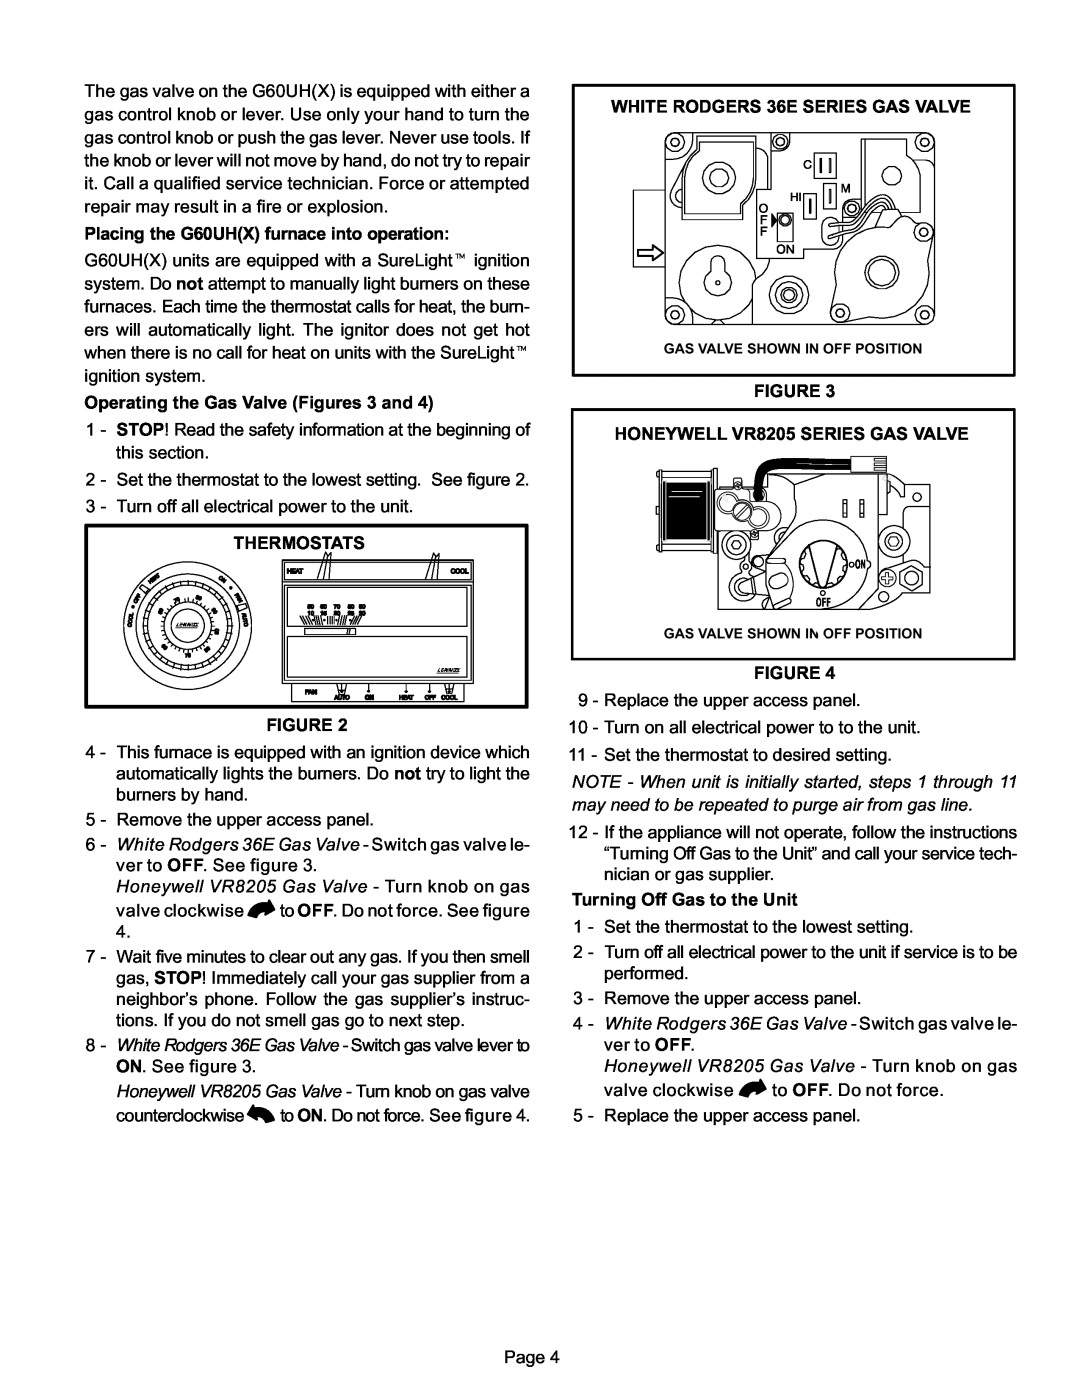 Lennox International Inc G60UH(X) manual Operating the Gas Valve Figures 3 and 